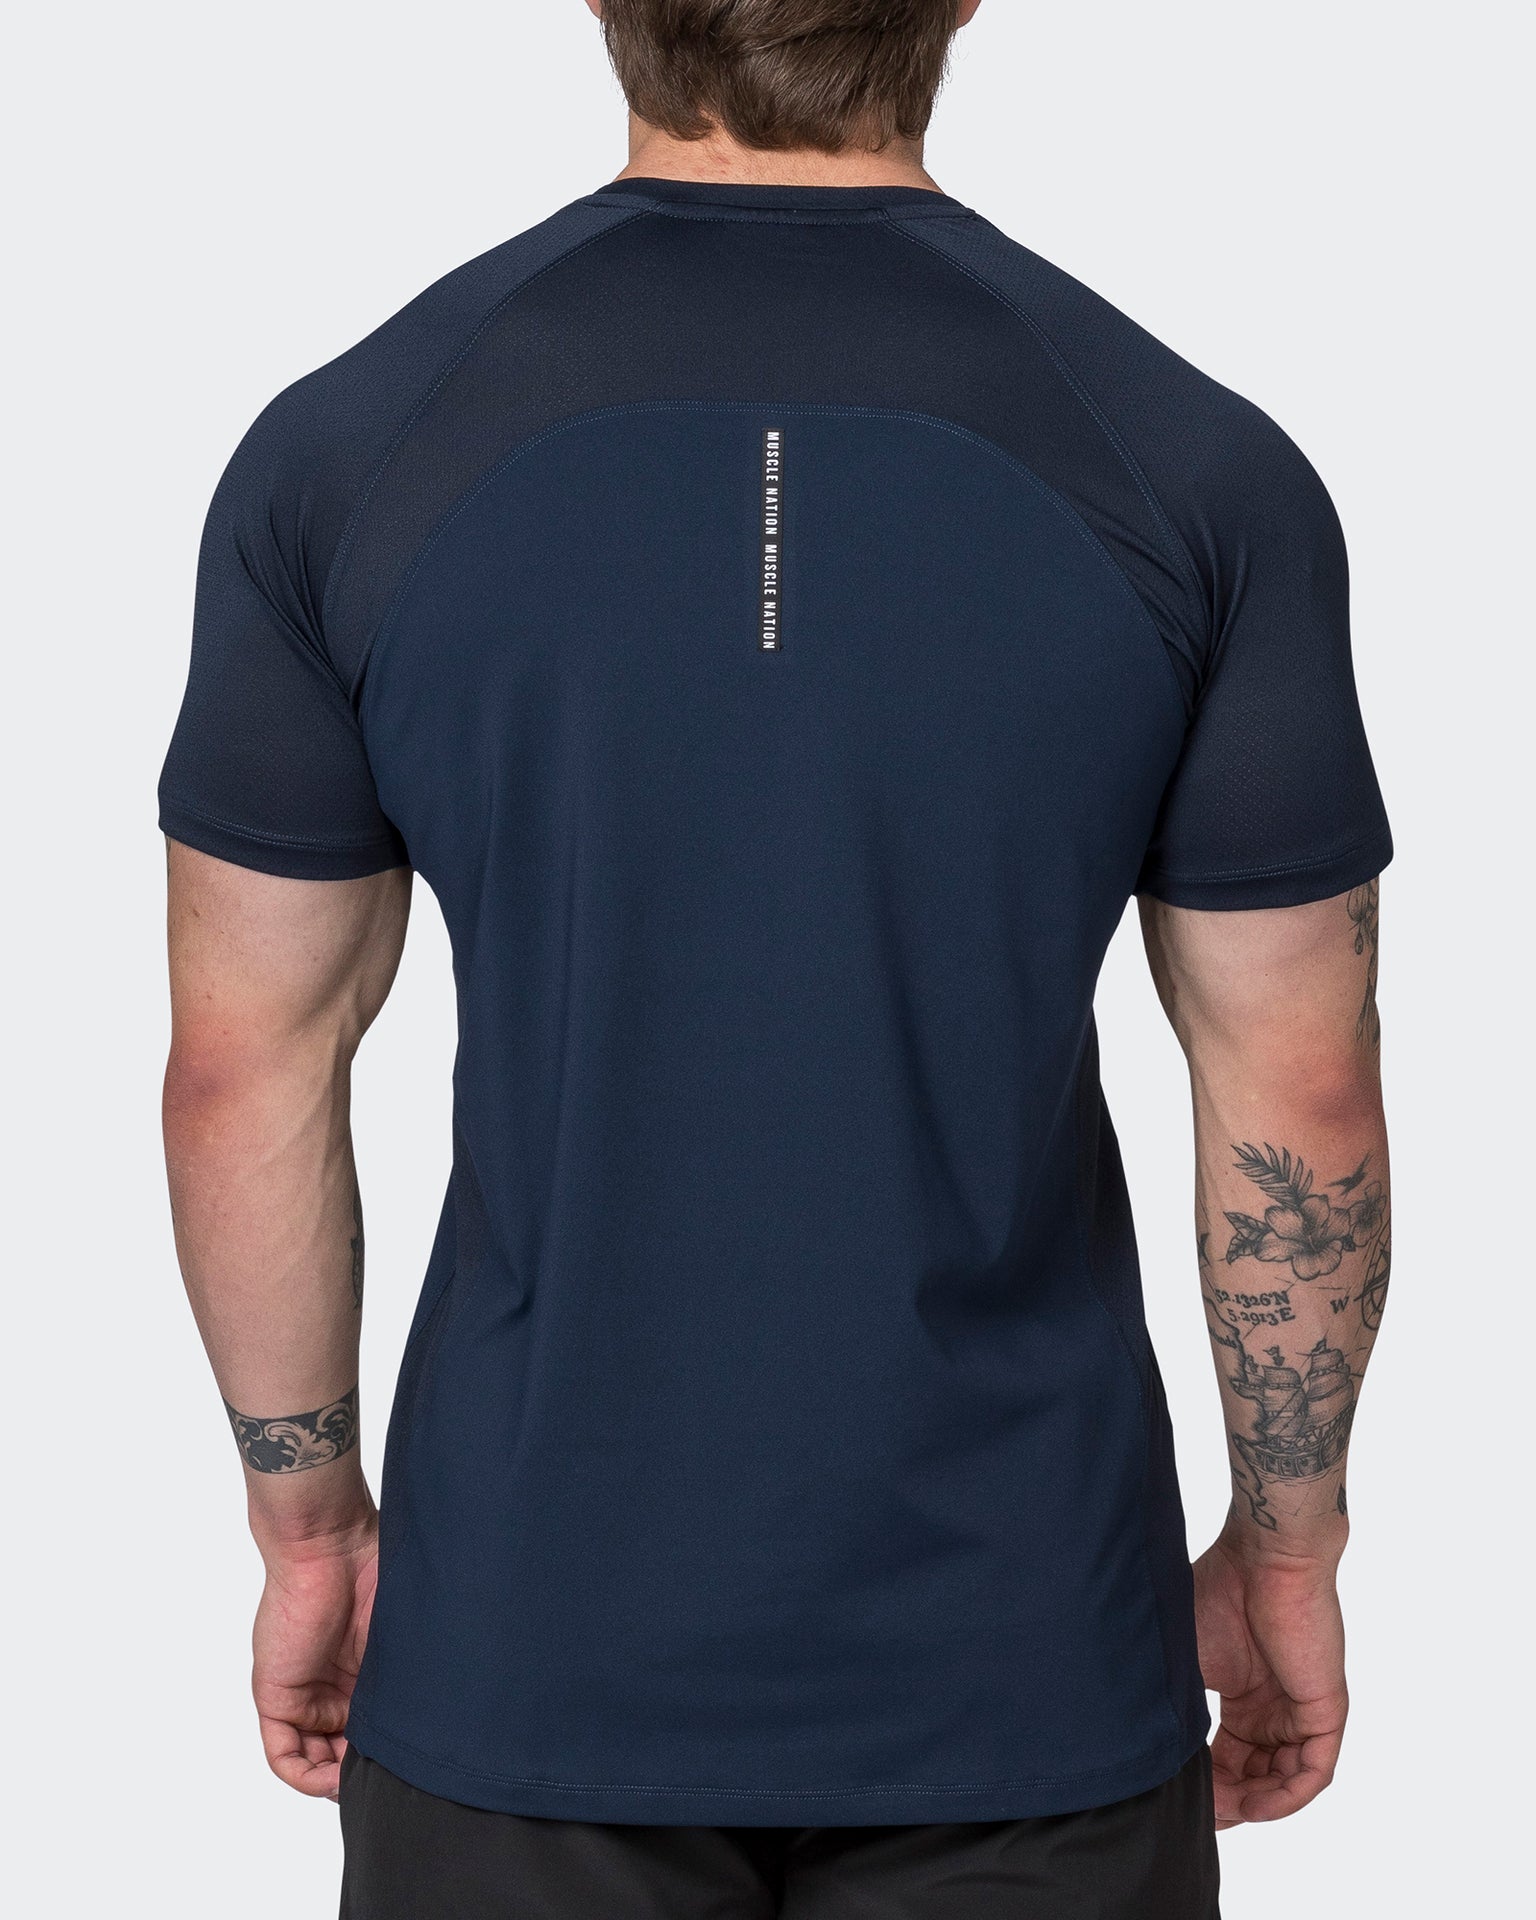 Muscle Nation T-Shirts Ventilation Tee - Odyssey